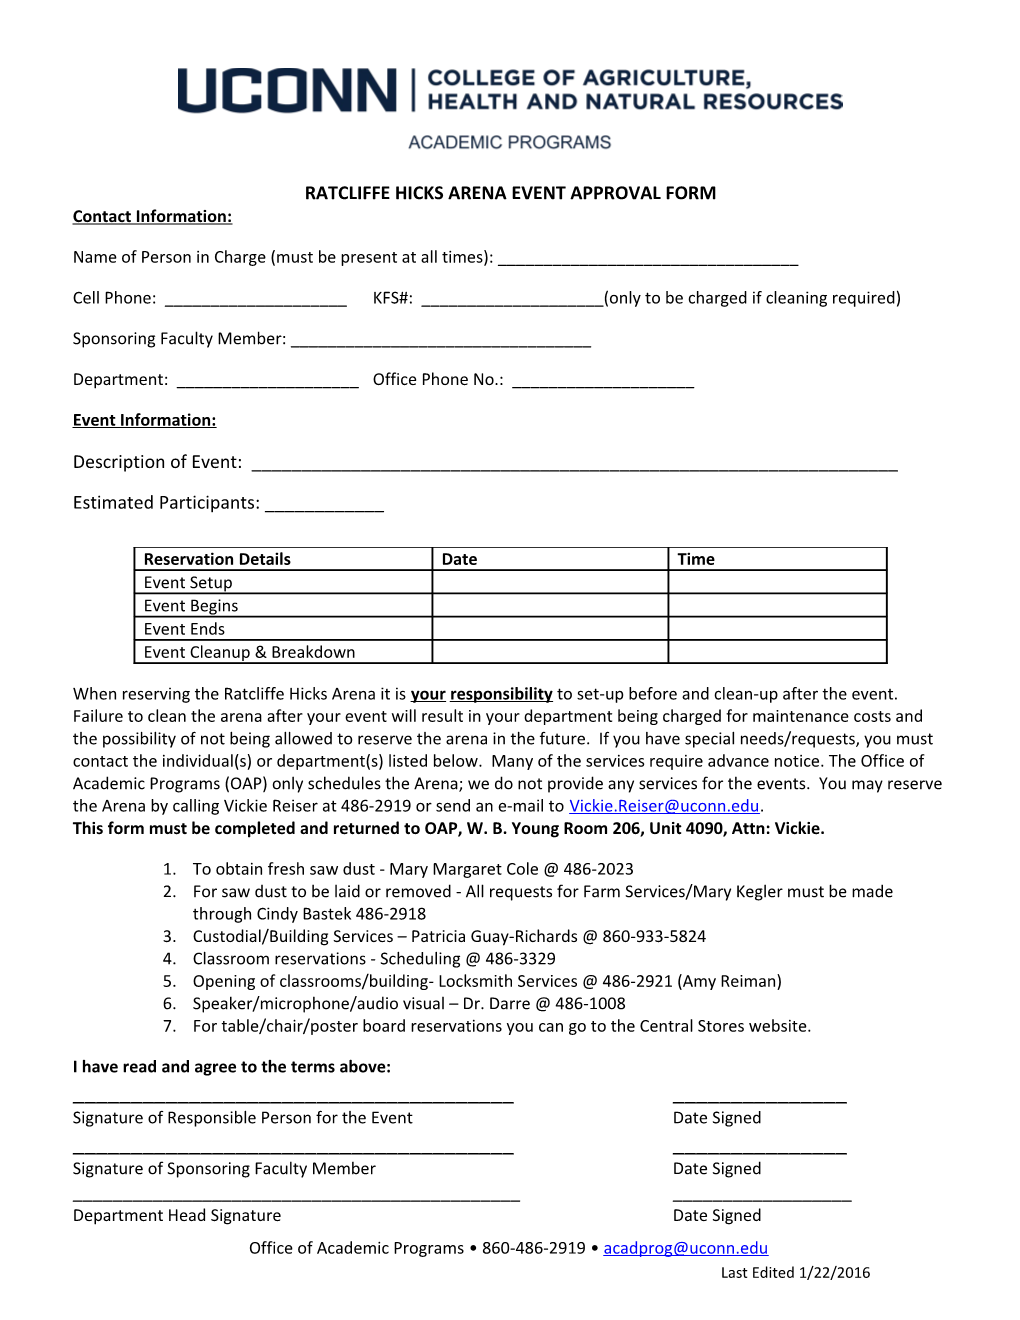 Ratcliffe Hicks Arena Event Approval Form